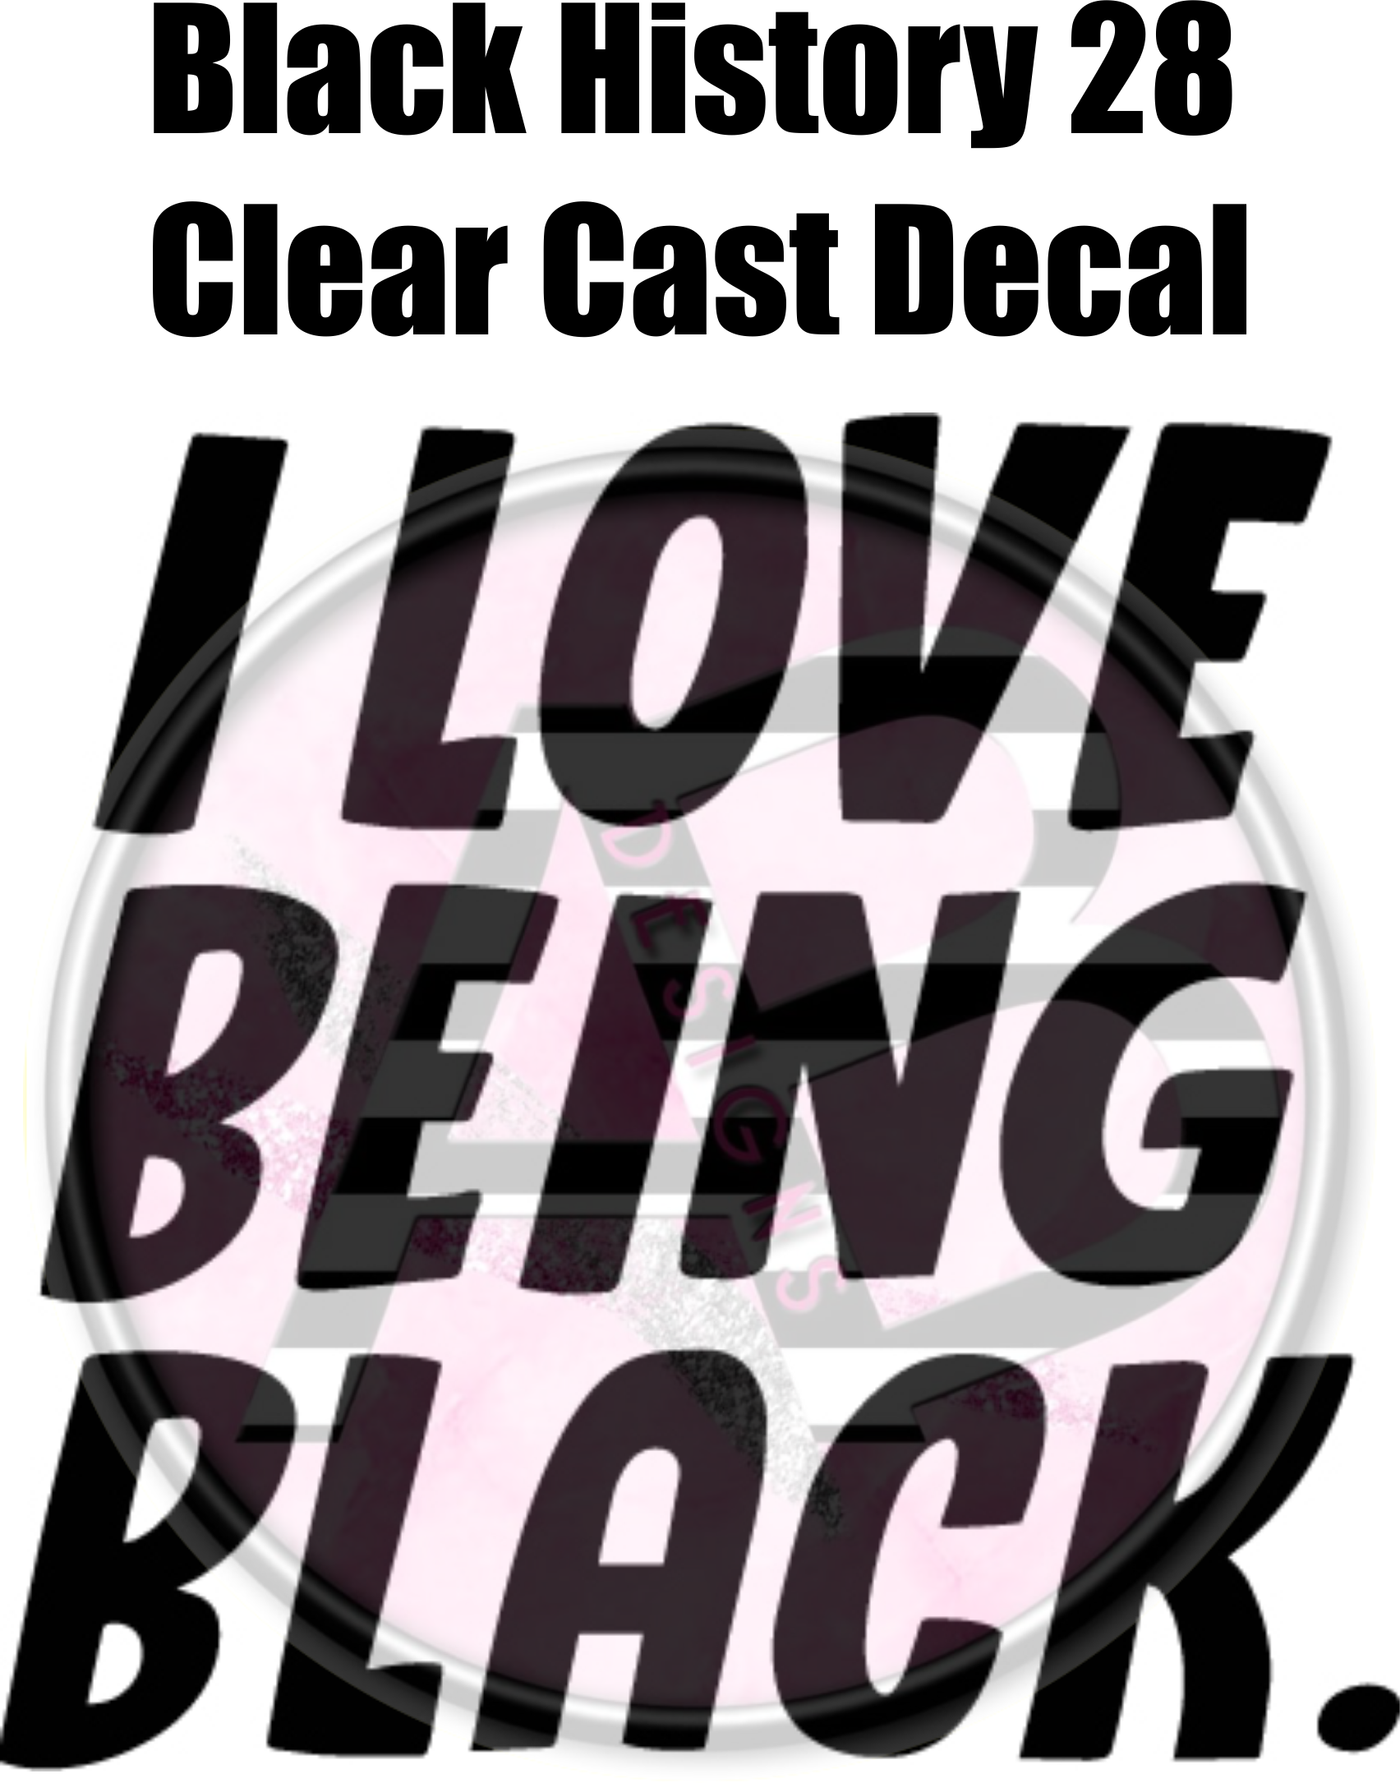 Black History 28 - Clear Cast Decal